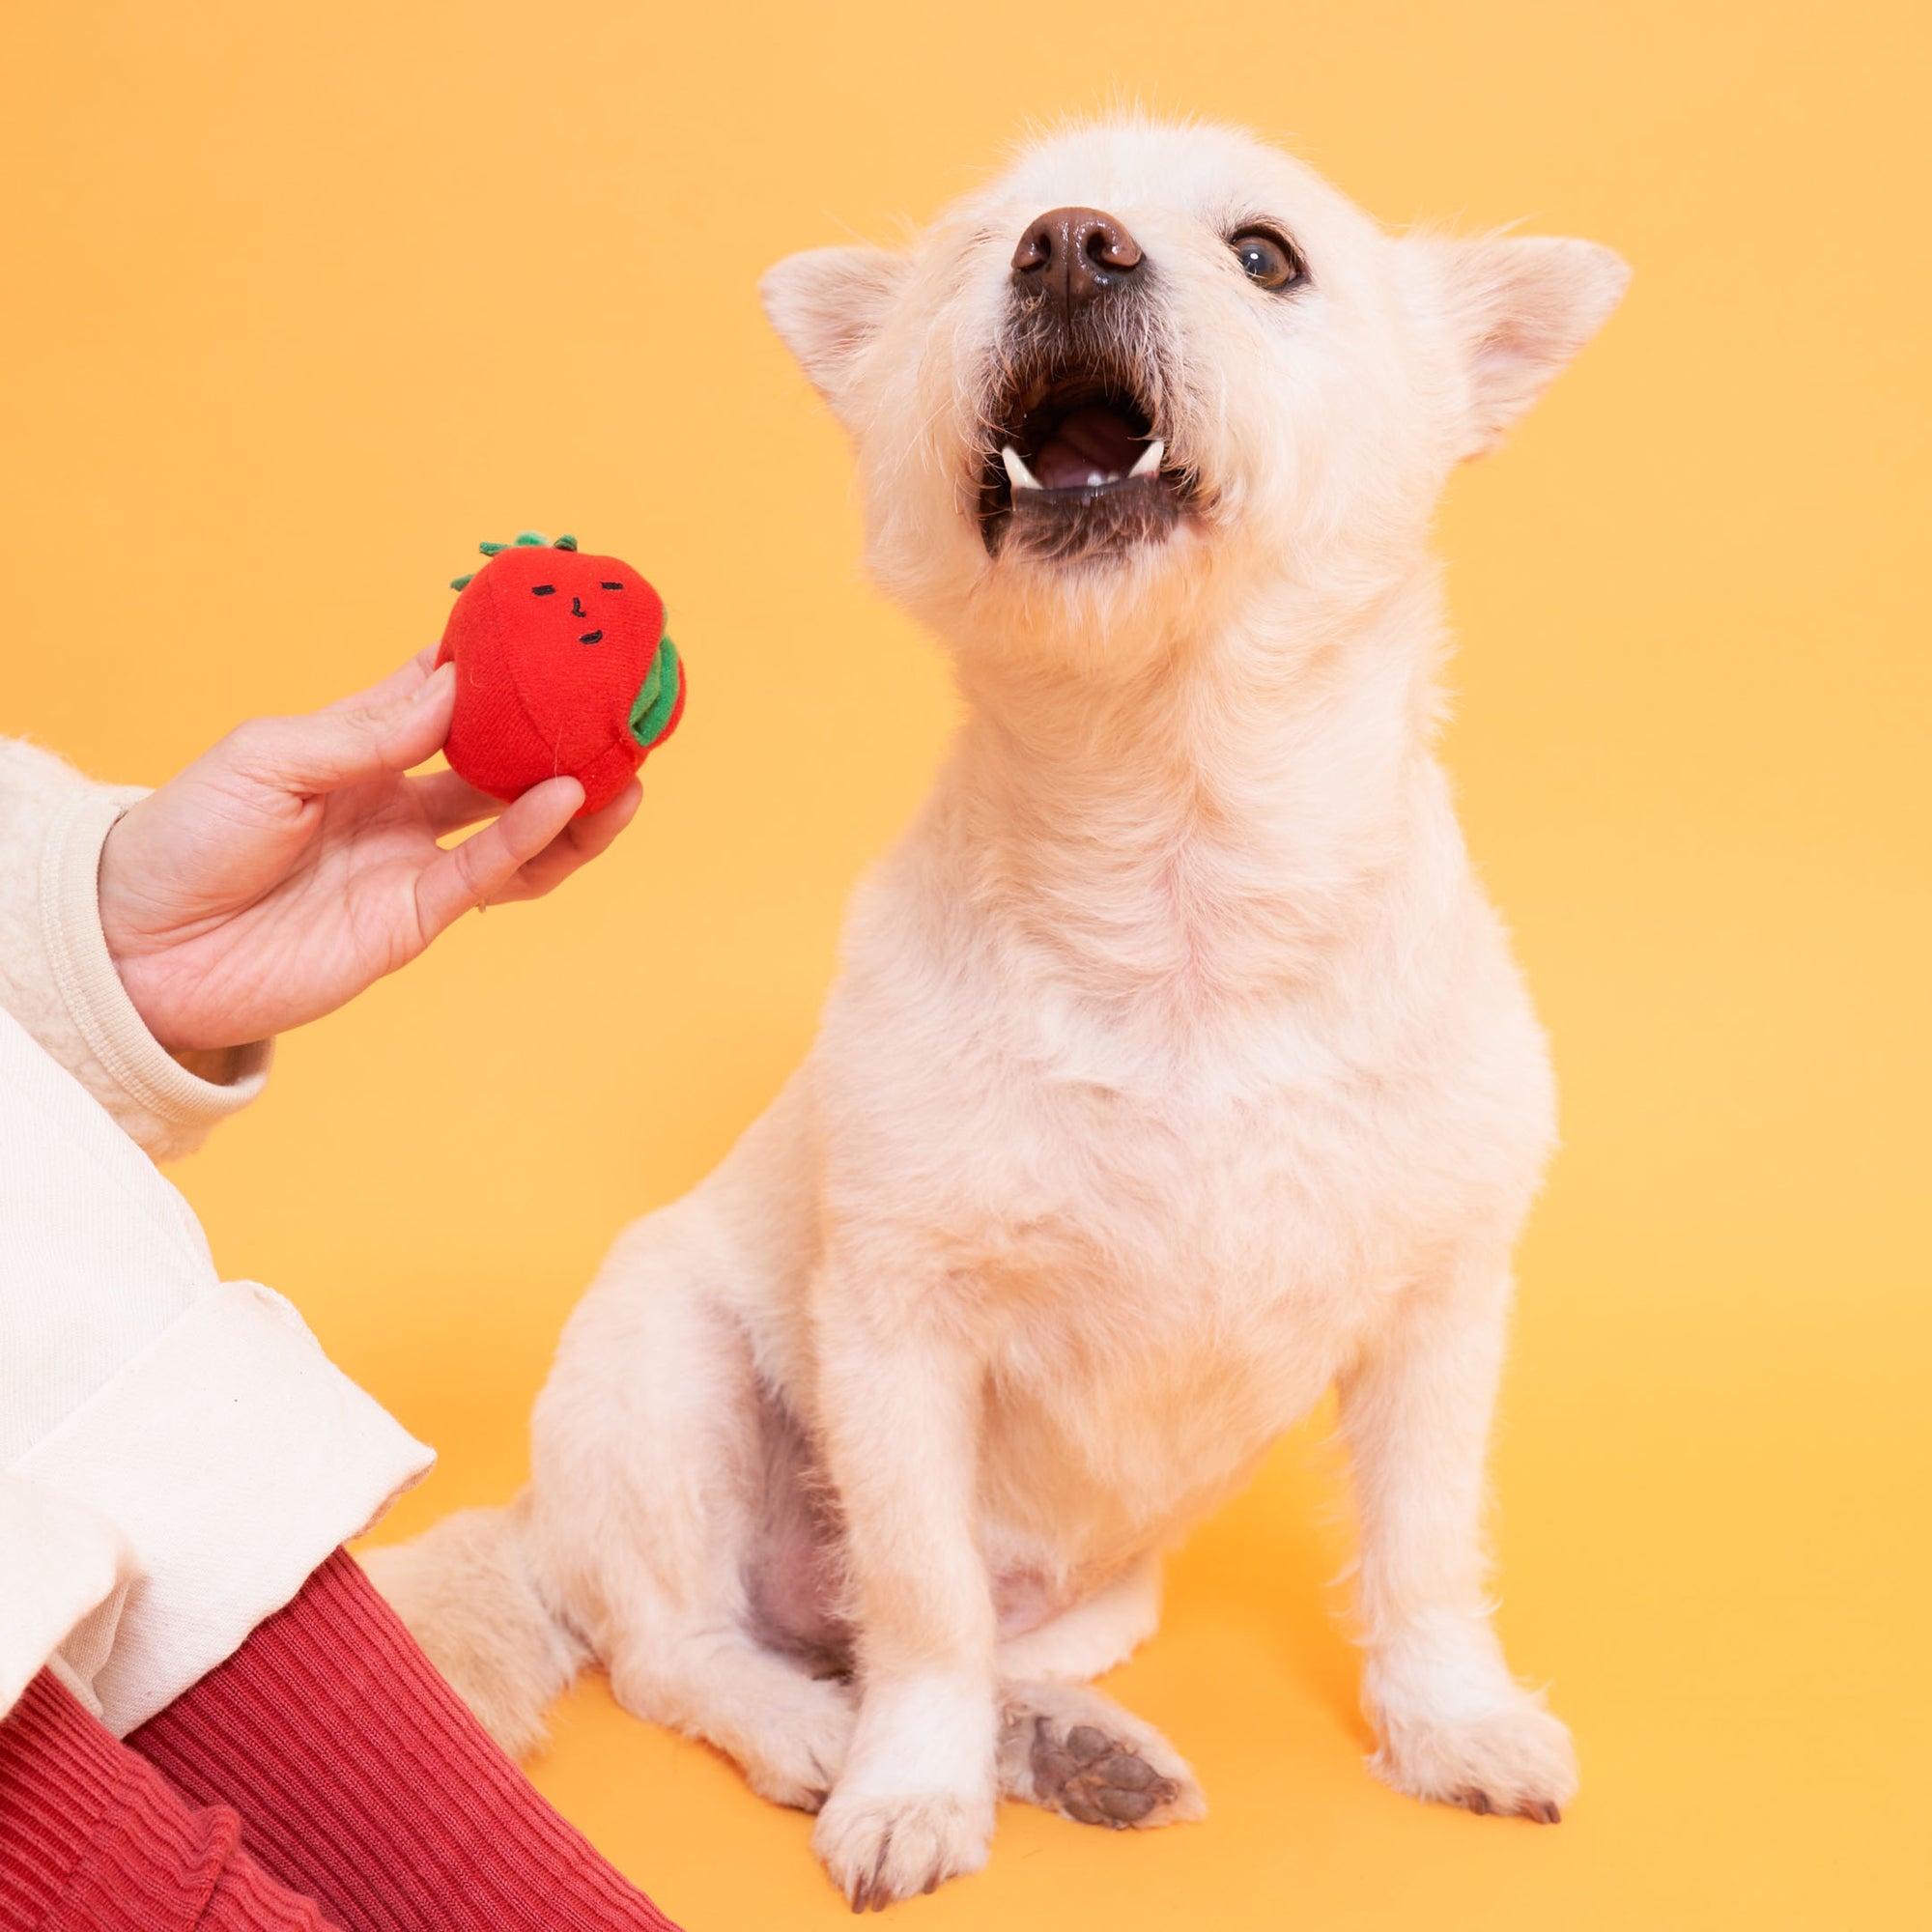 The image features a small, light-colored dog sitting up and looking excitedly at a plush tomato toy being held by a human hand. The background is a warm orange color, providing a cheerful and vibrant atmosphere. The dog's open mouth and upward gaze convey a sense of eagerness, as if it is ready to play or catch the toy. This photo captures the playful and happy essence that pets often exhibit during interactive playtime with their owners.